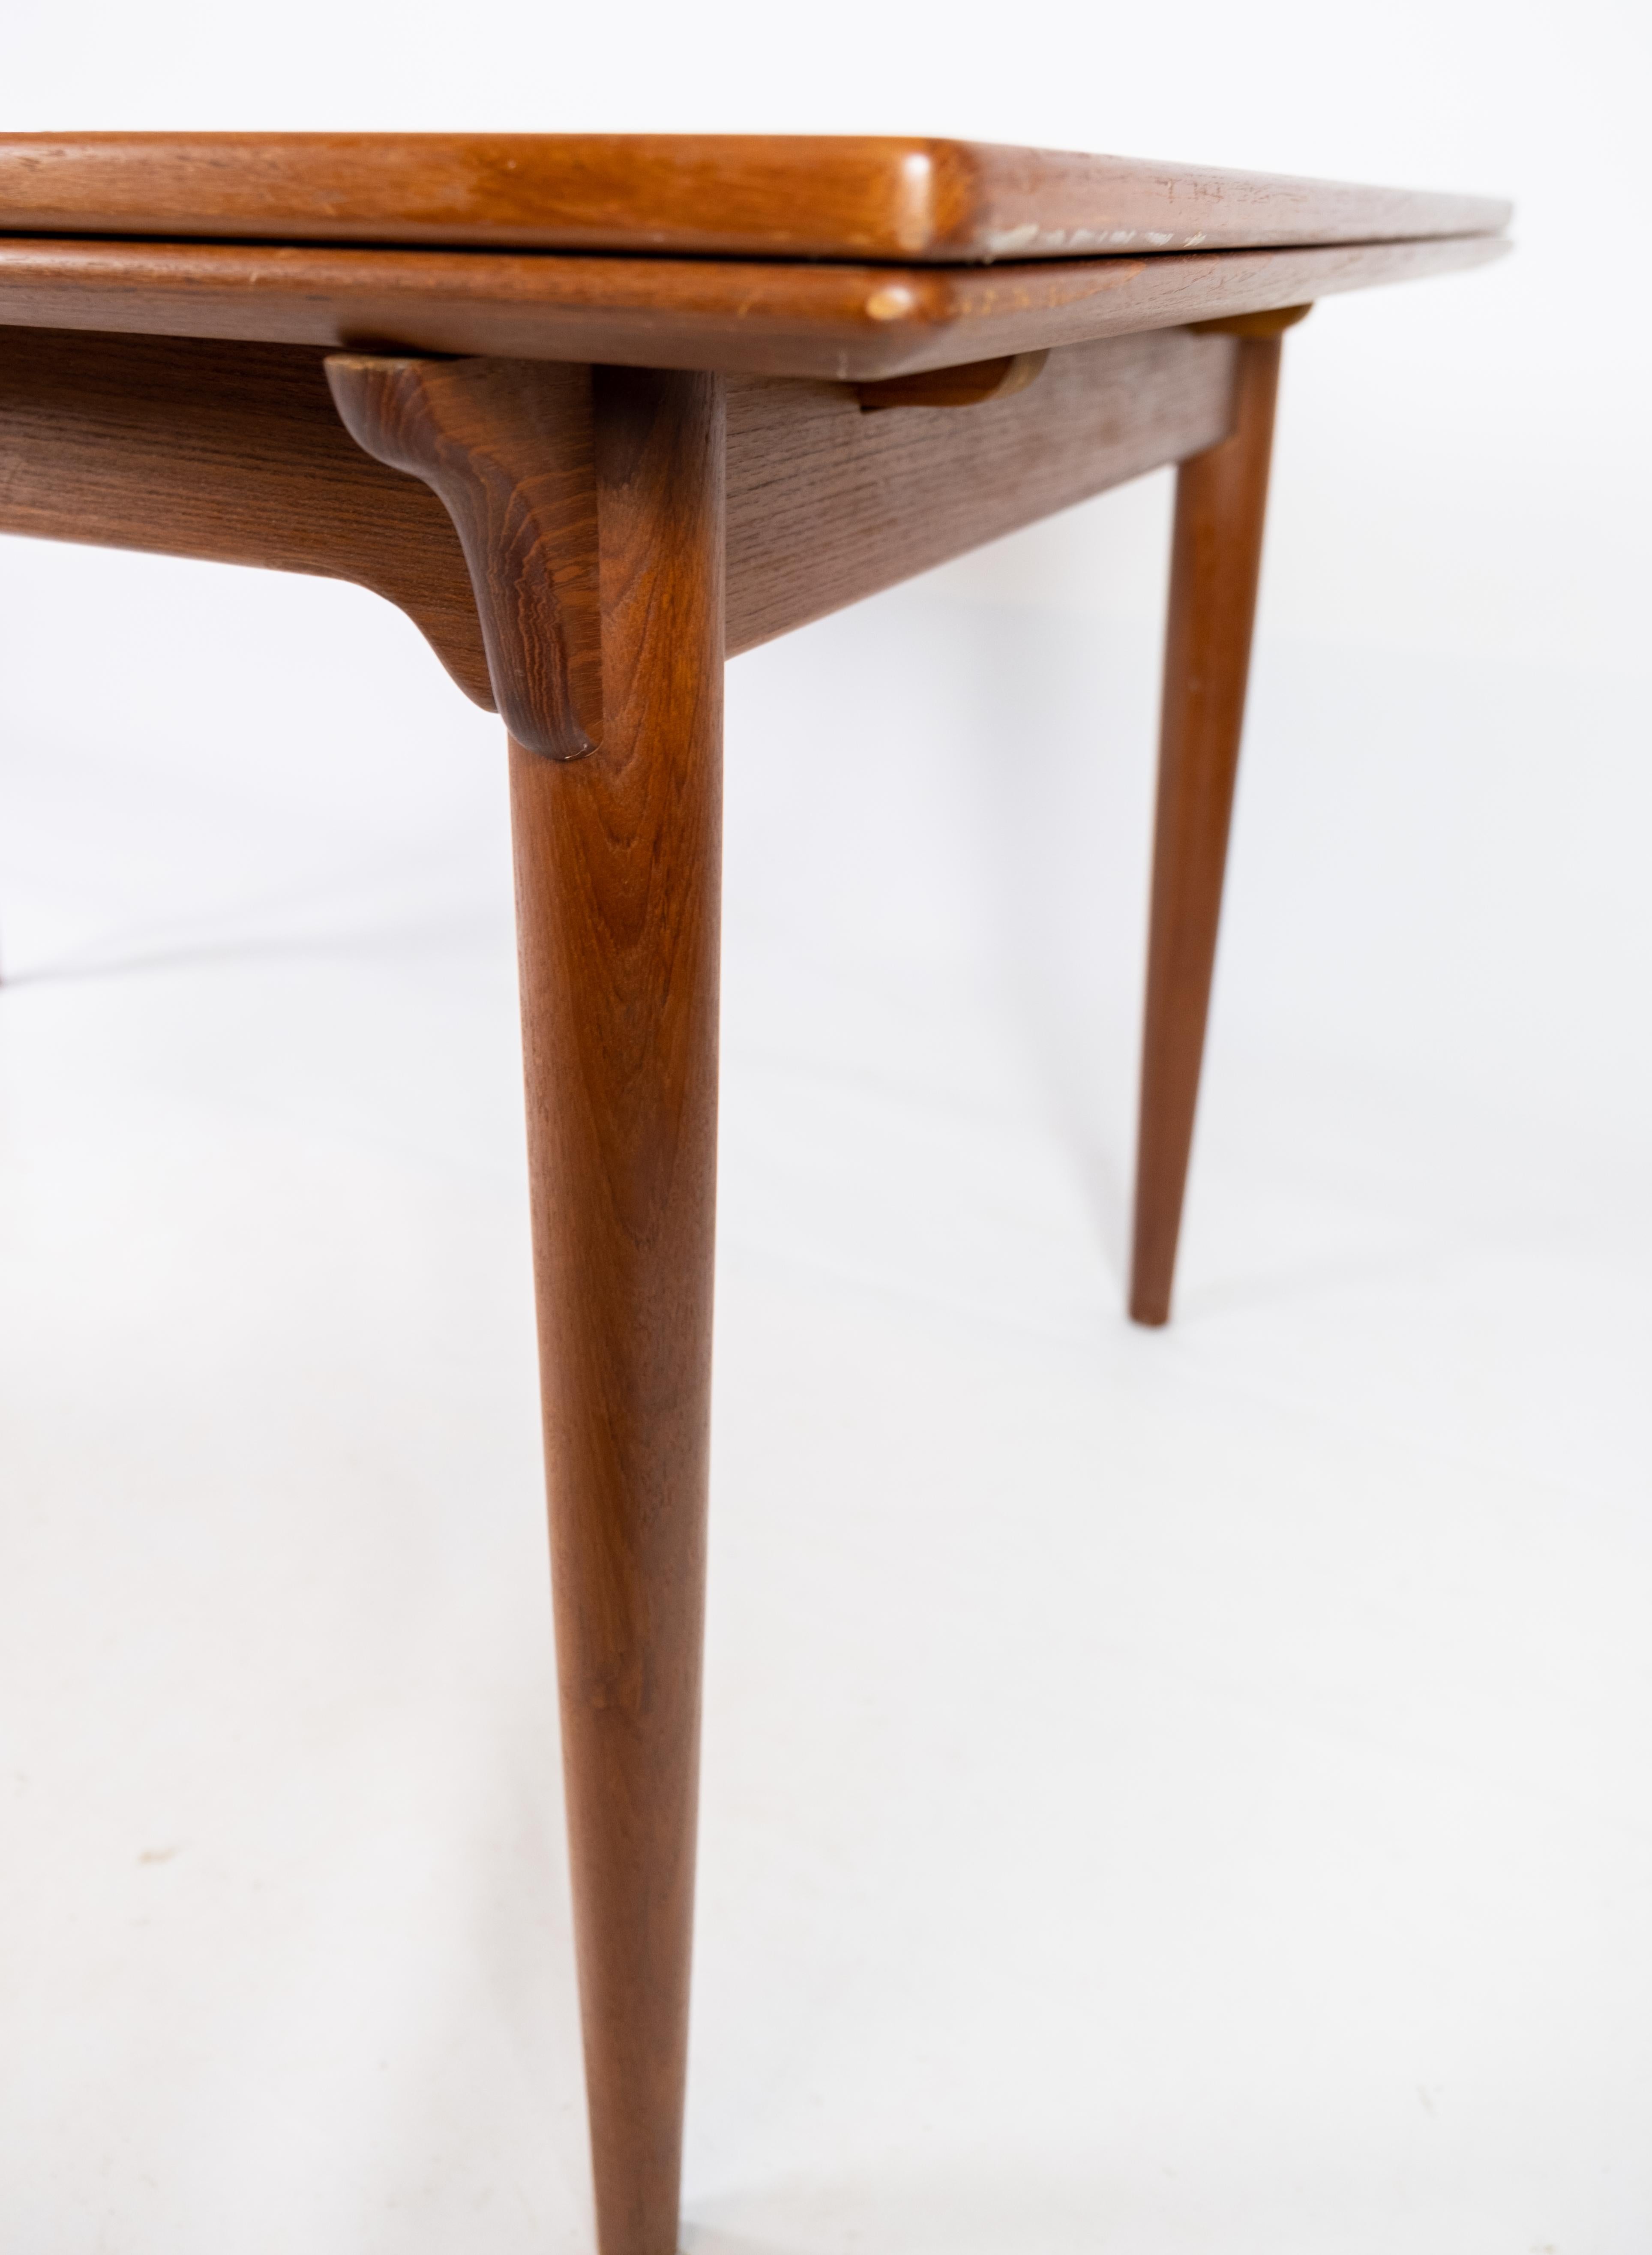 Dining Table Made In Teak With Extentions, Danish Design From 1960s For Sale 1